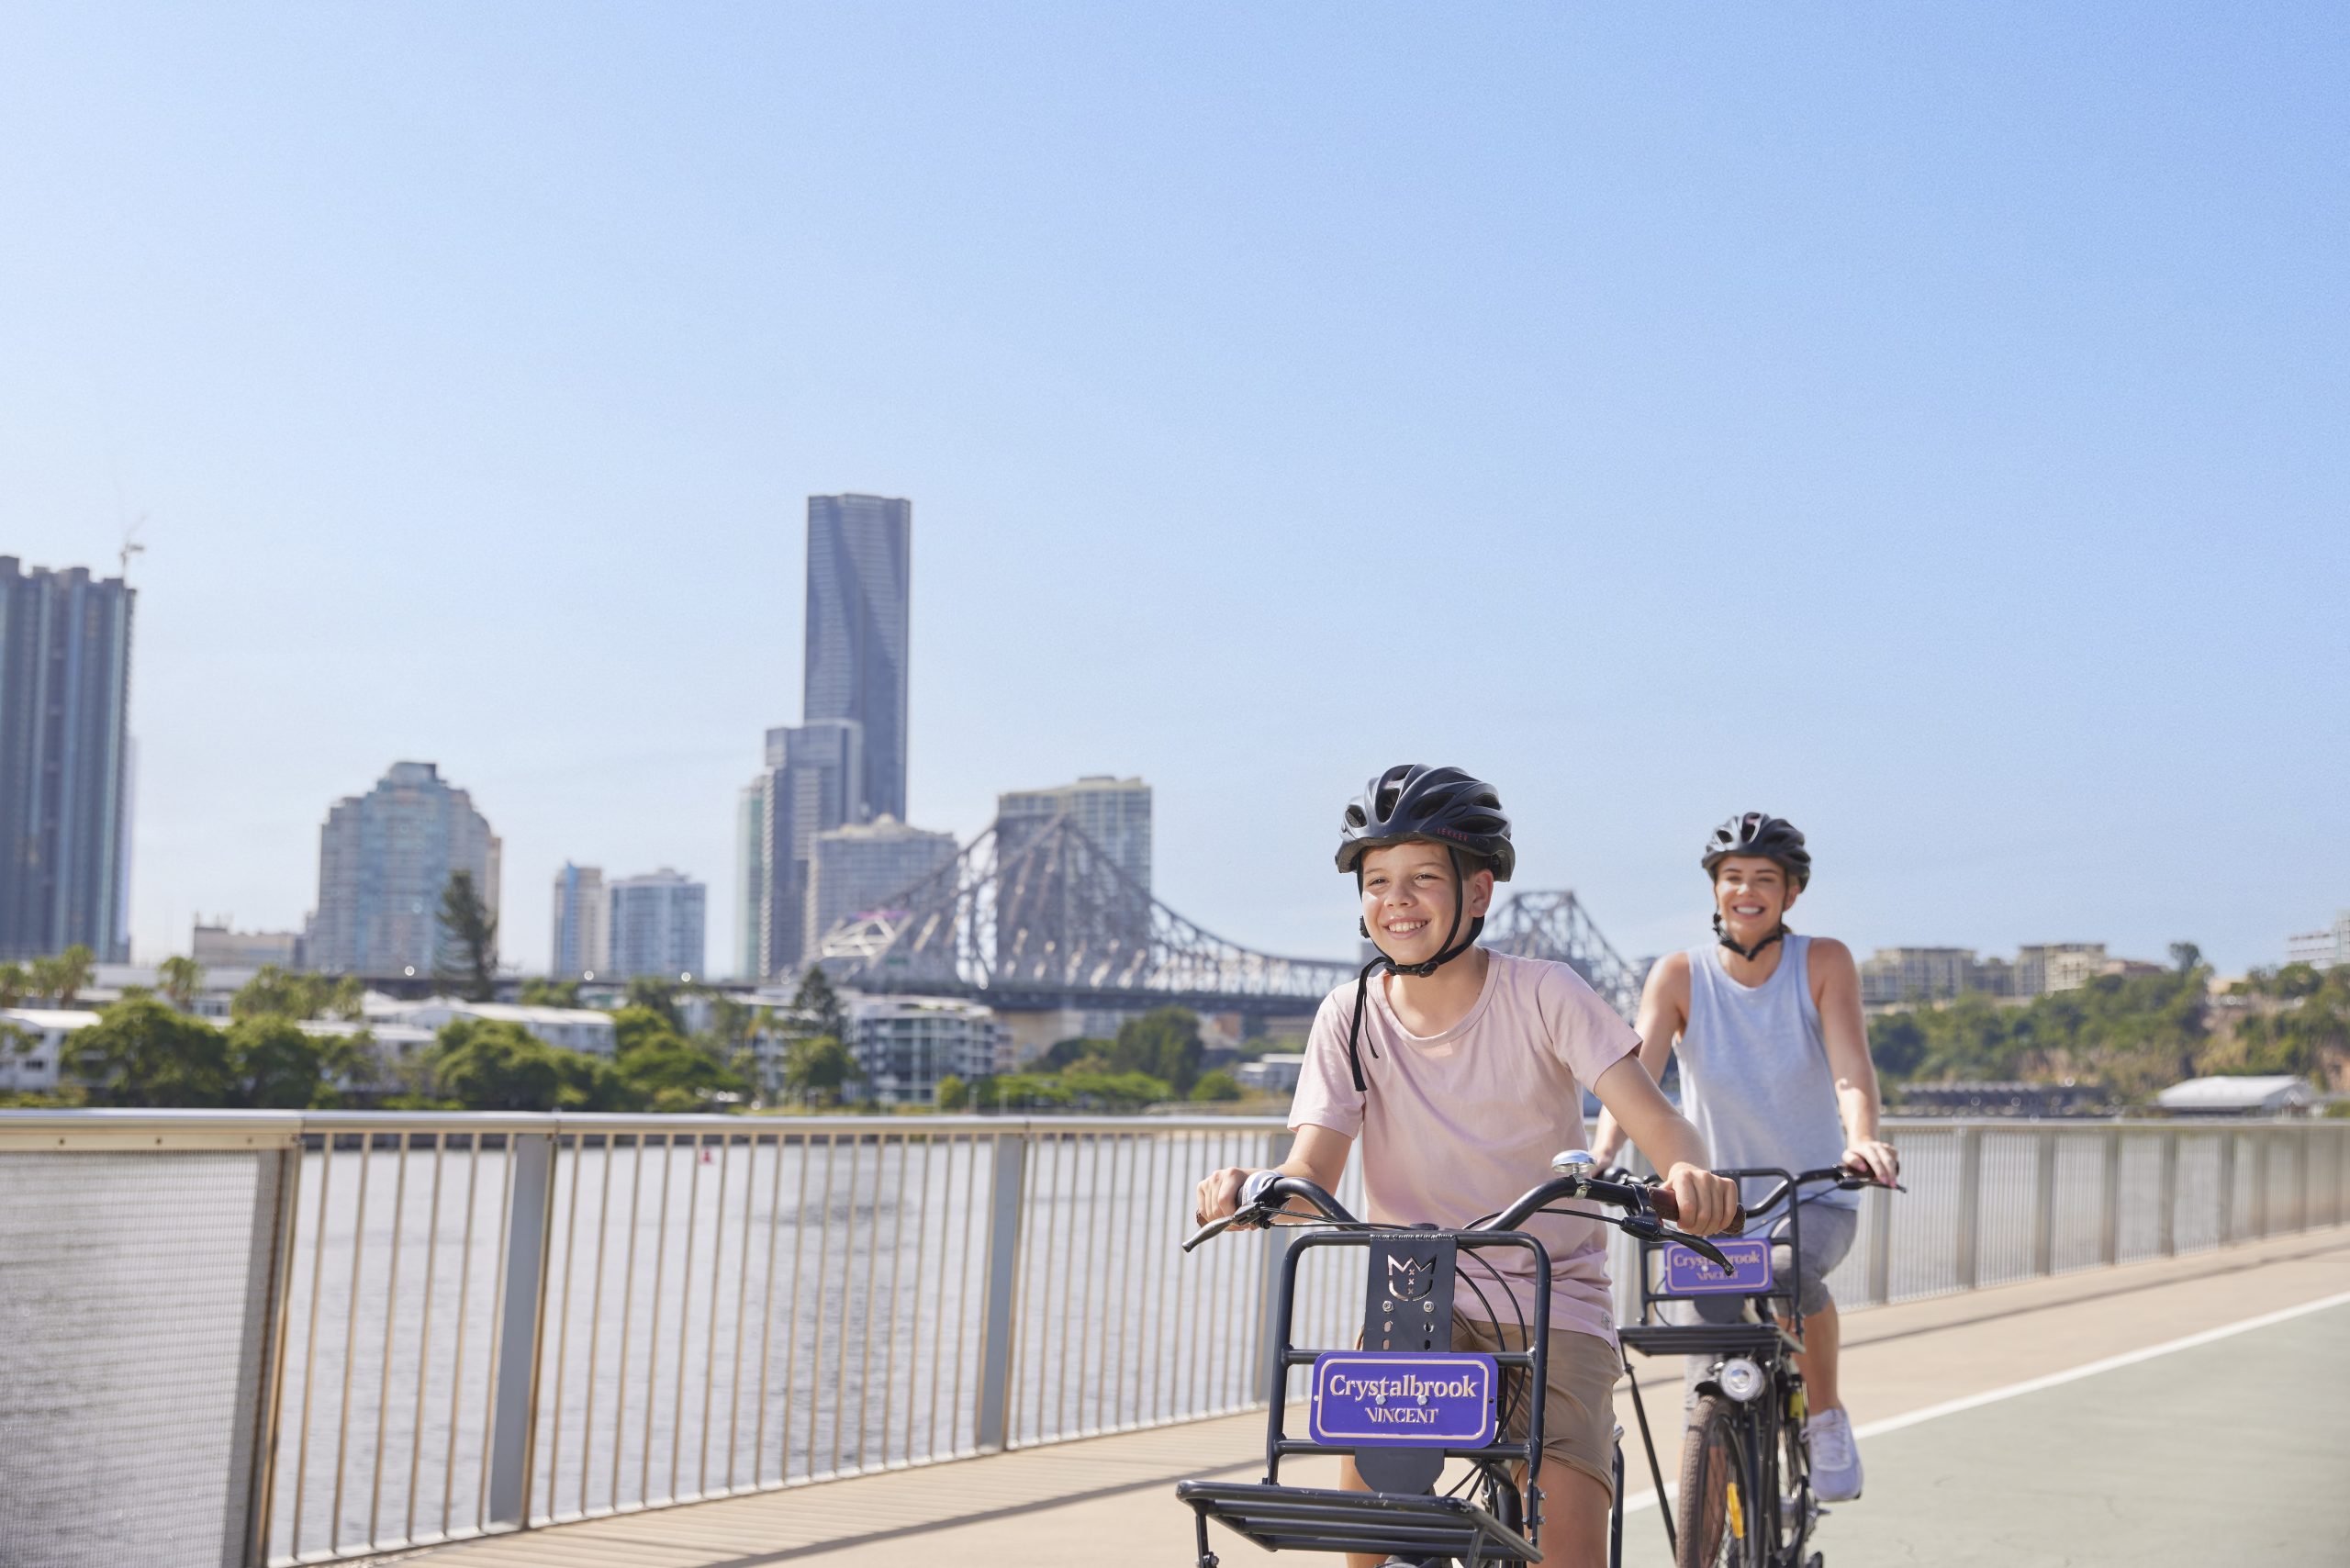 The city of Brisbane offers significant lifestyle benefits. It was recently named in Time Magazine's list of greatest places in the world.